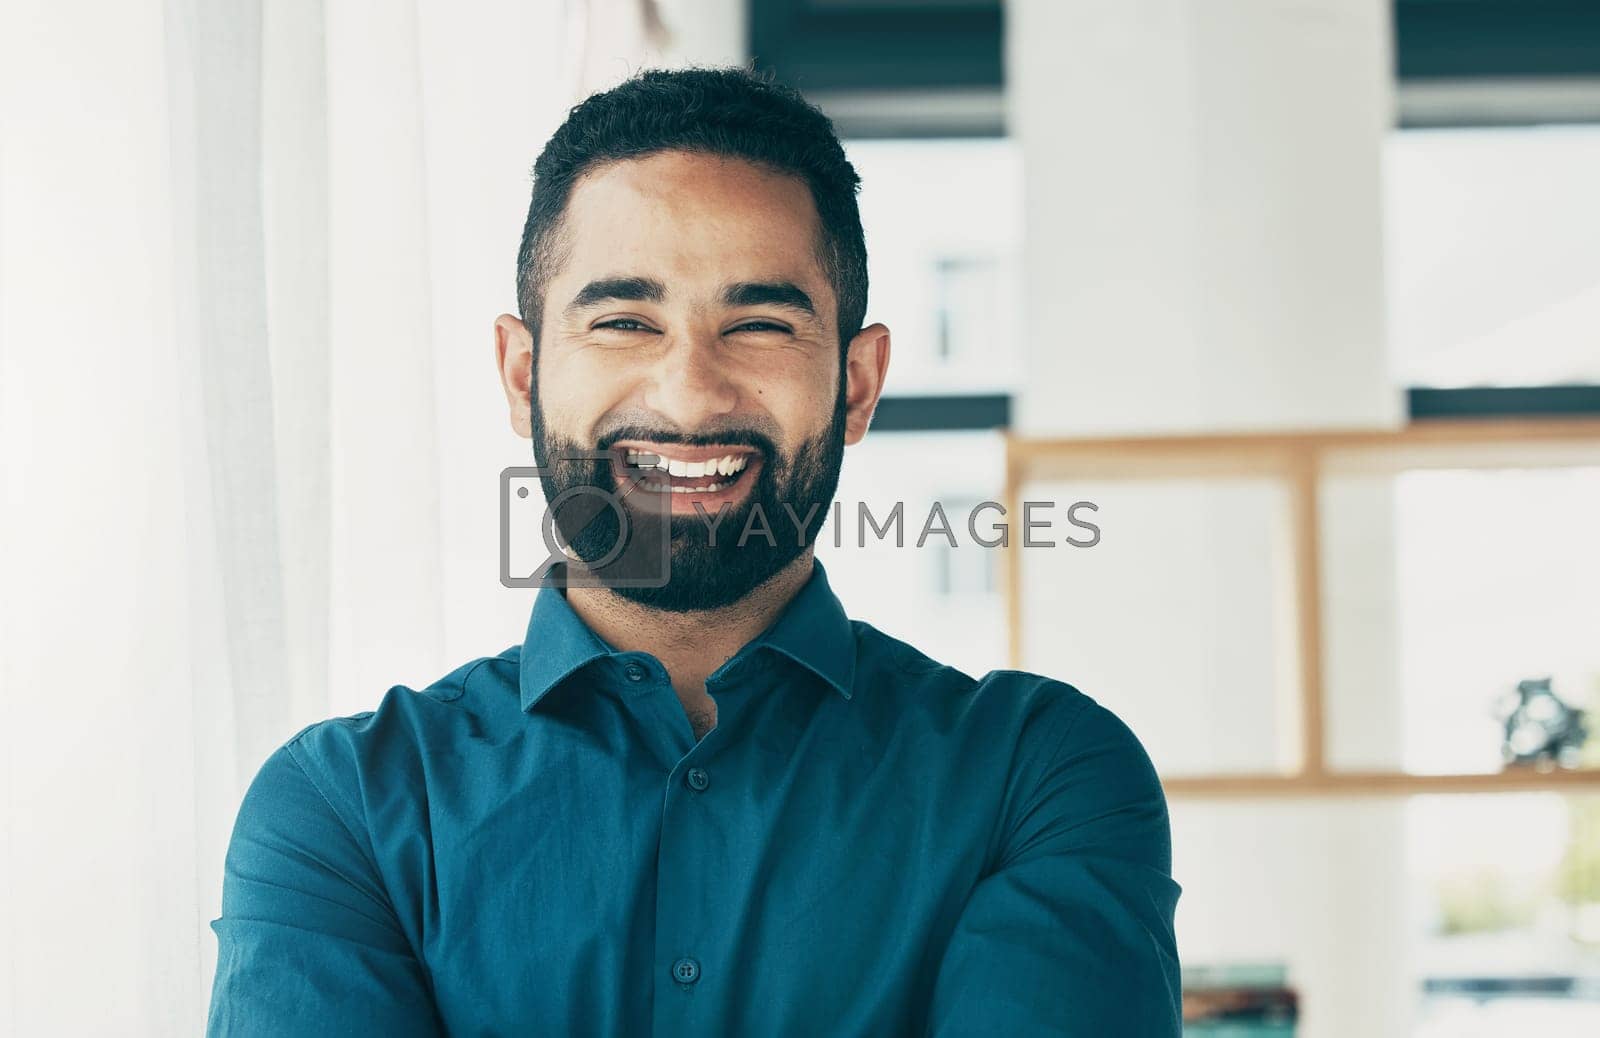 Royalty free image of Laughing, happy and portrait of a businessman in an office with confidence for a corporate career. Smile, professional and headshot of a male employee in the workplace as a lawyer or attorney by YuriArcurs